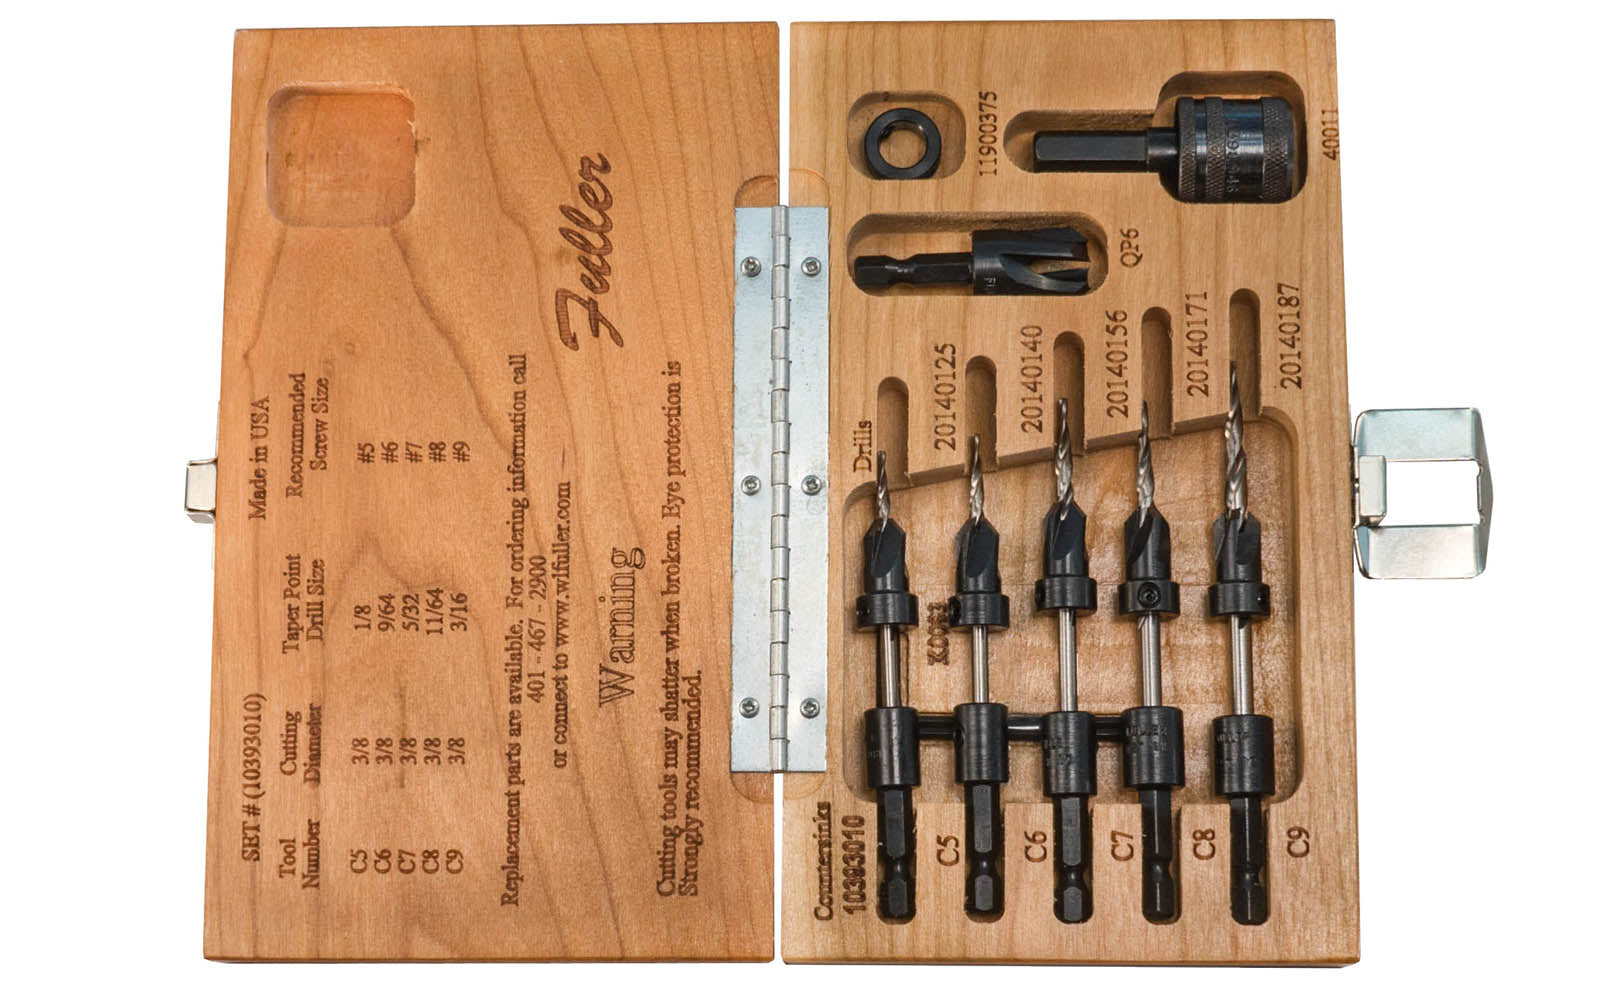 W.L. Fuller No. 10 Set - Model 10393010 - Combination countersink & quick change taper drill bit set with plug cutter, quick change adapter & stop collar. Designed for #5, #6, #7, #8, & #9 wood screws. Carbon steel & heat-treated. Four flute countersinks for clean & accurate boring. Hex Drill Bits. Made in USA